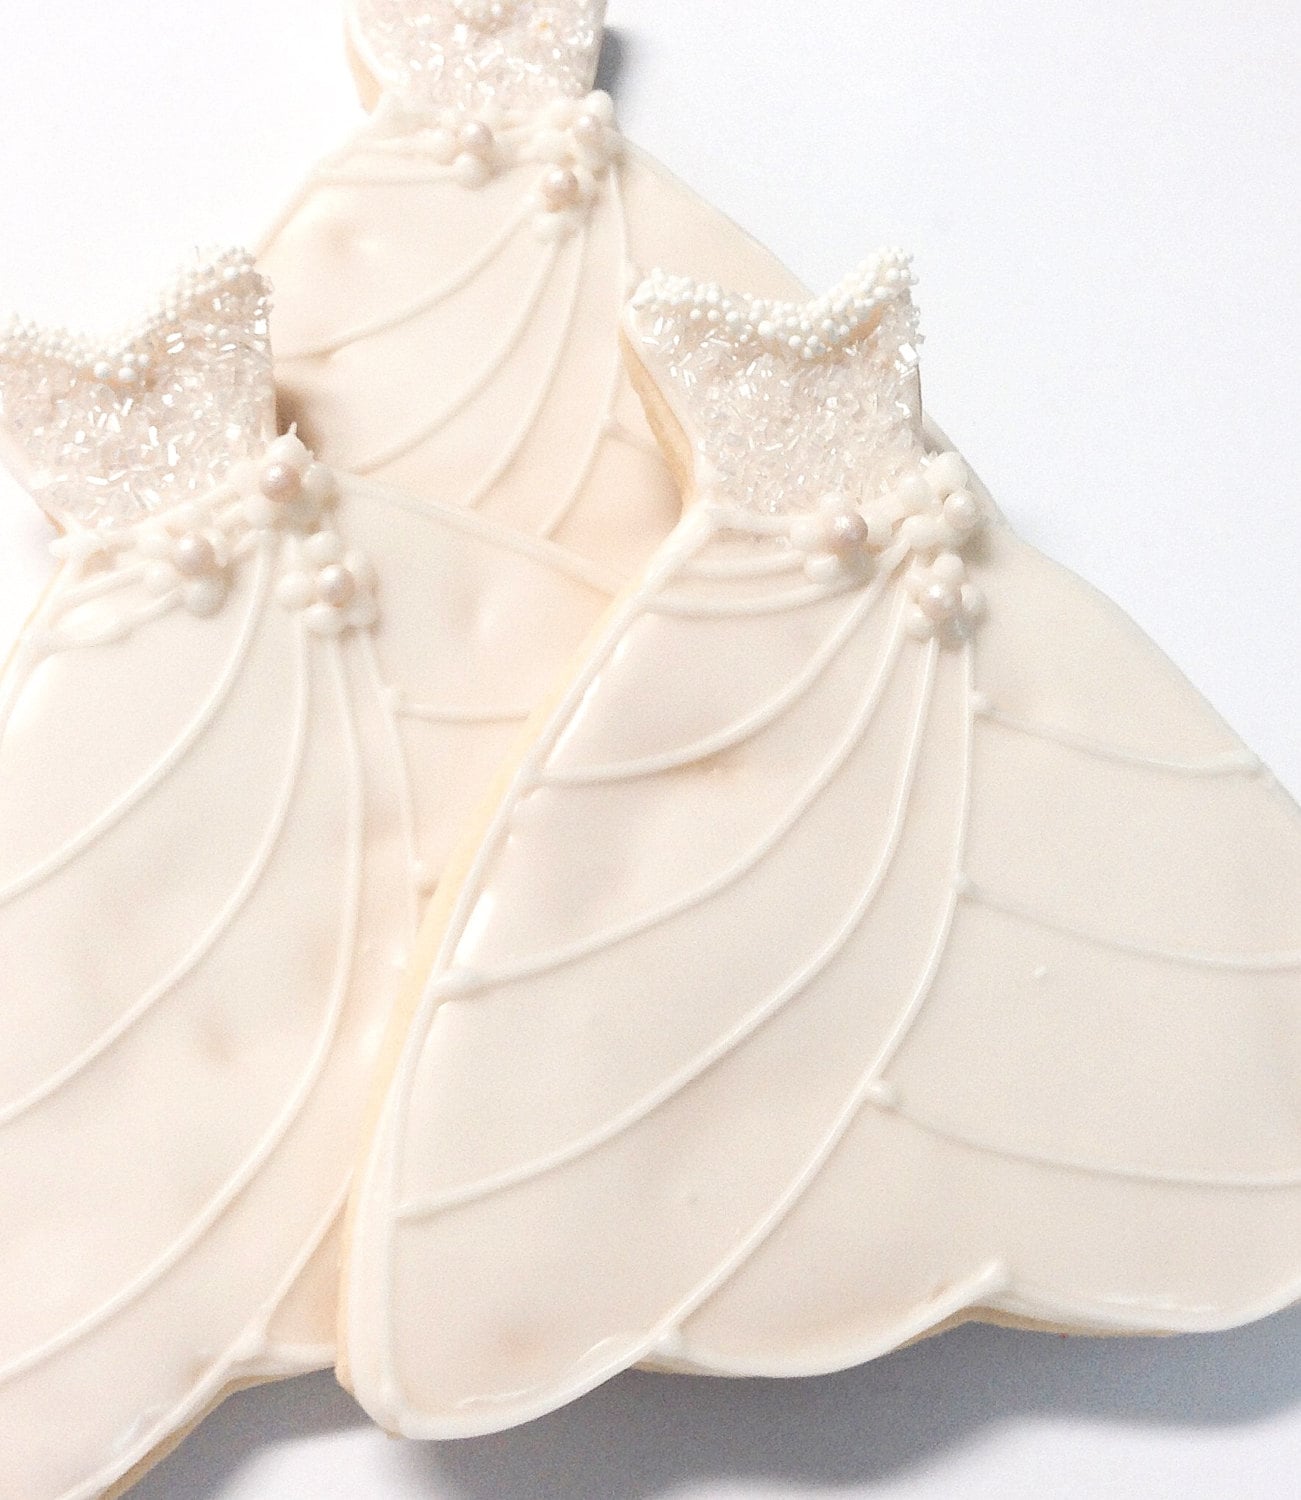 Wedding Dress Cookie Iced Decorated Sugar by